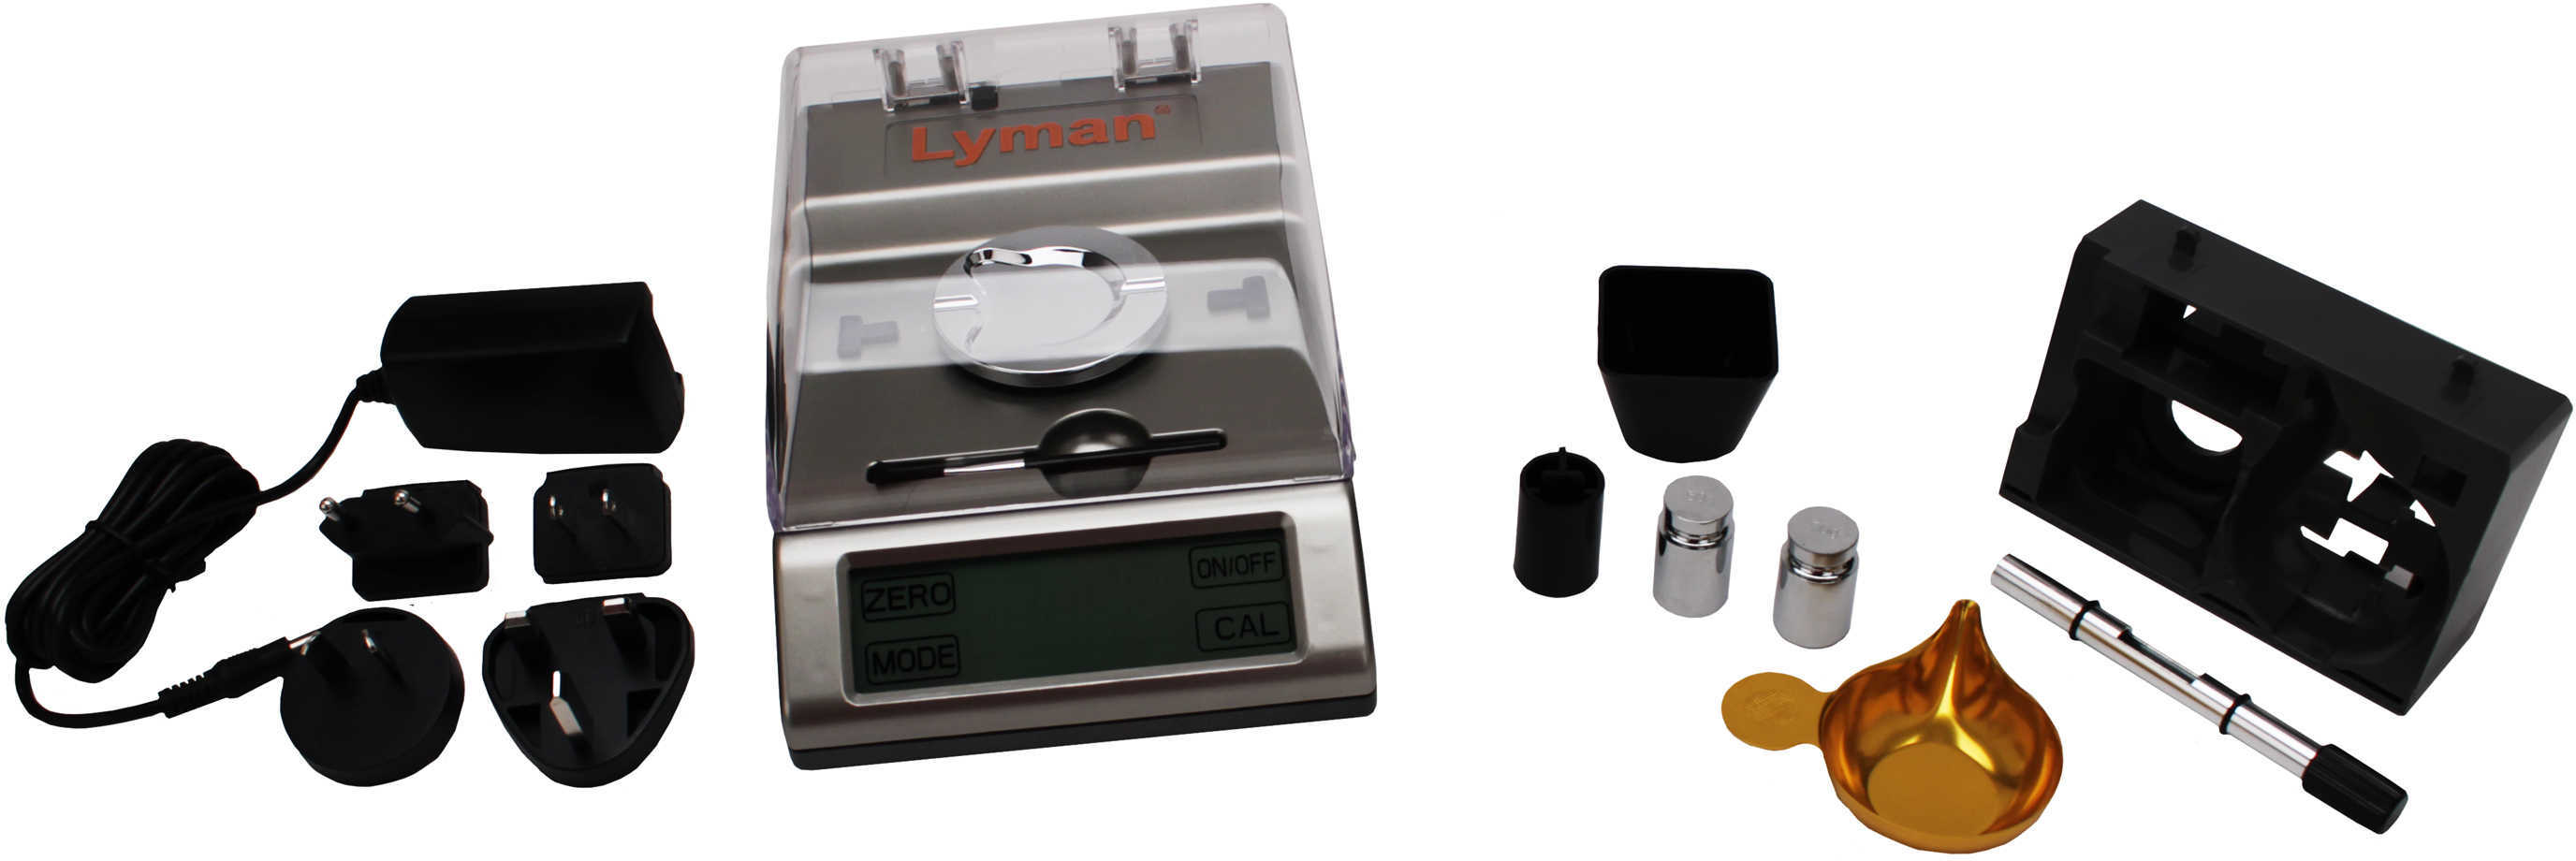 Accu-Touch 2000 Electronic Scale